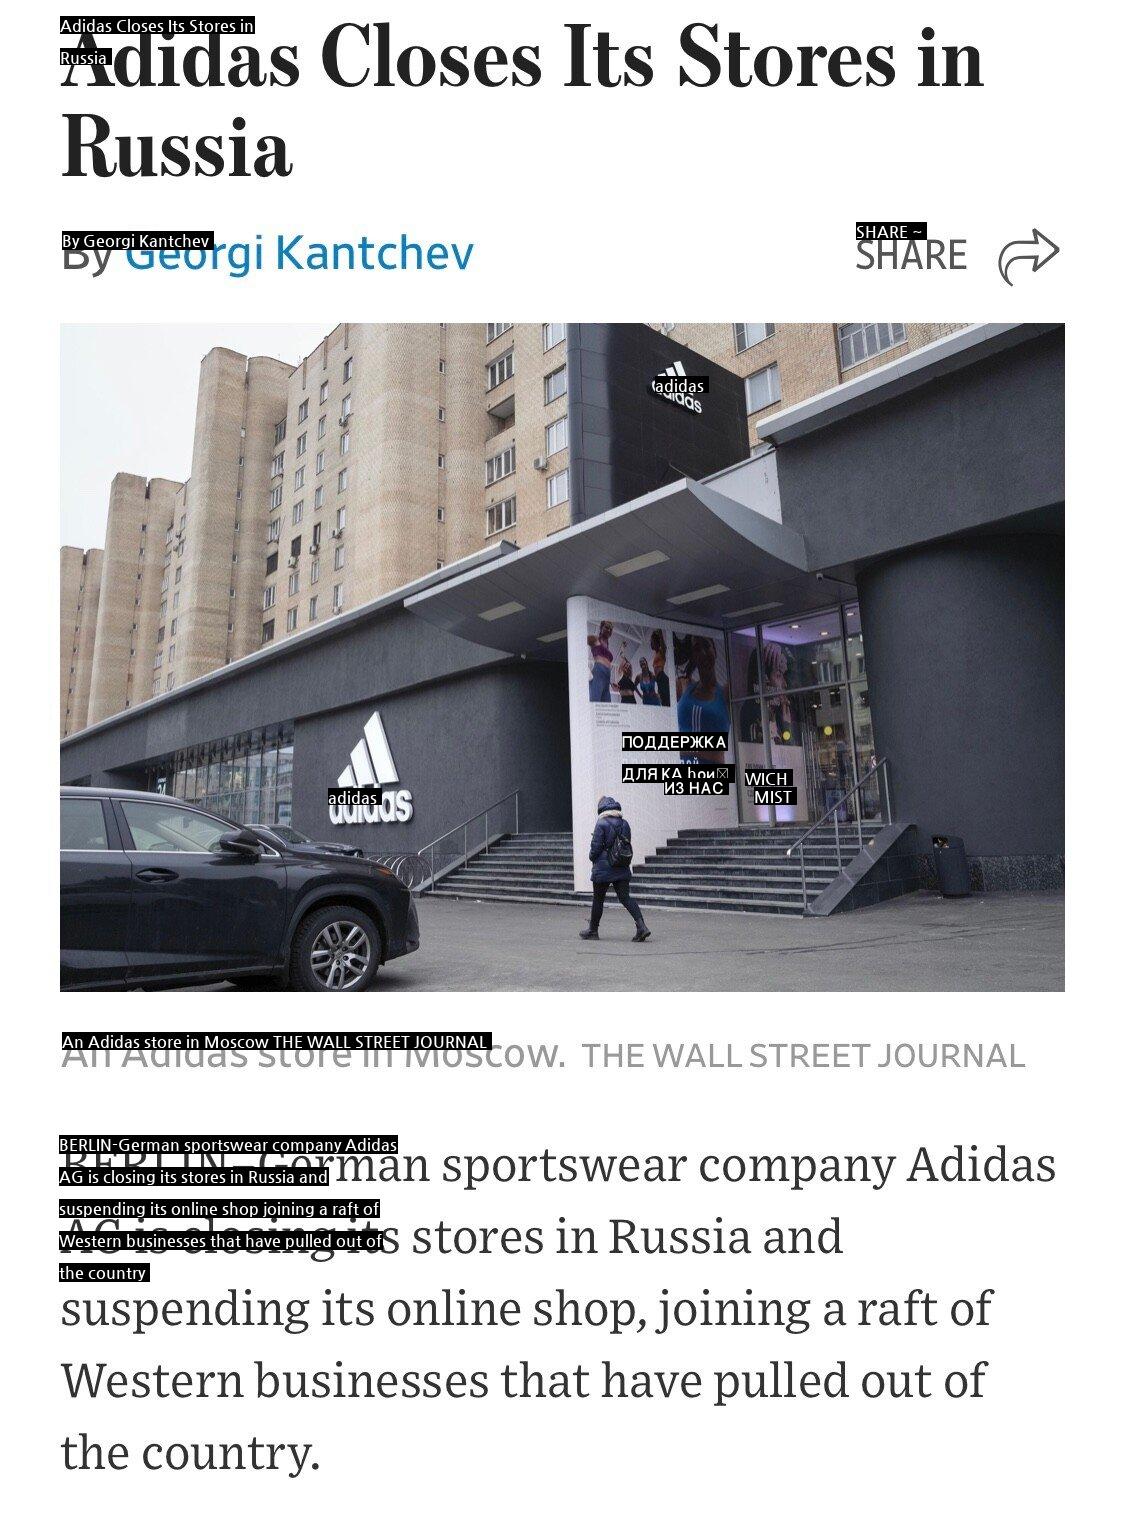 Adidas Russia branch is closed.